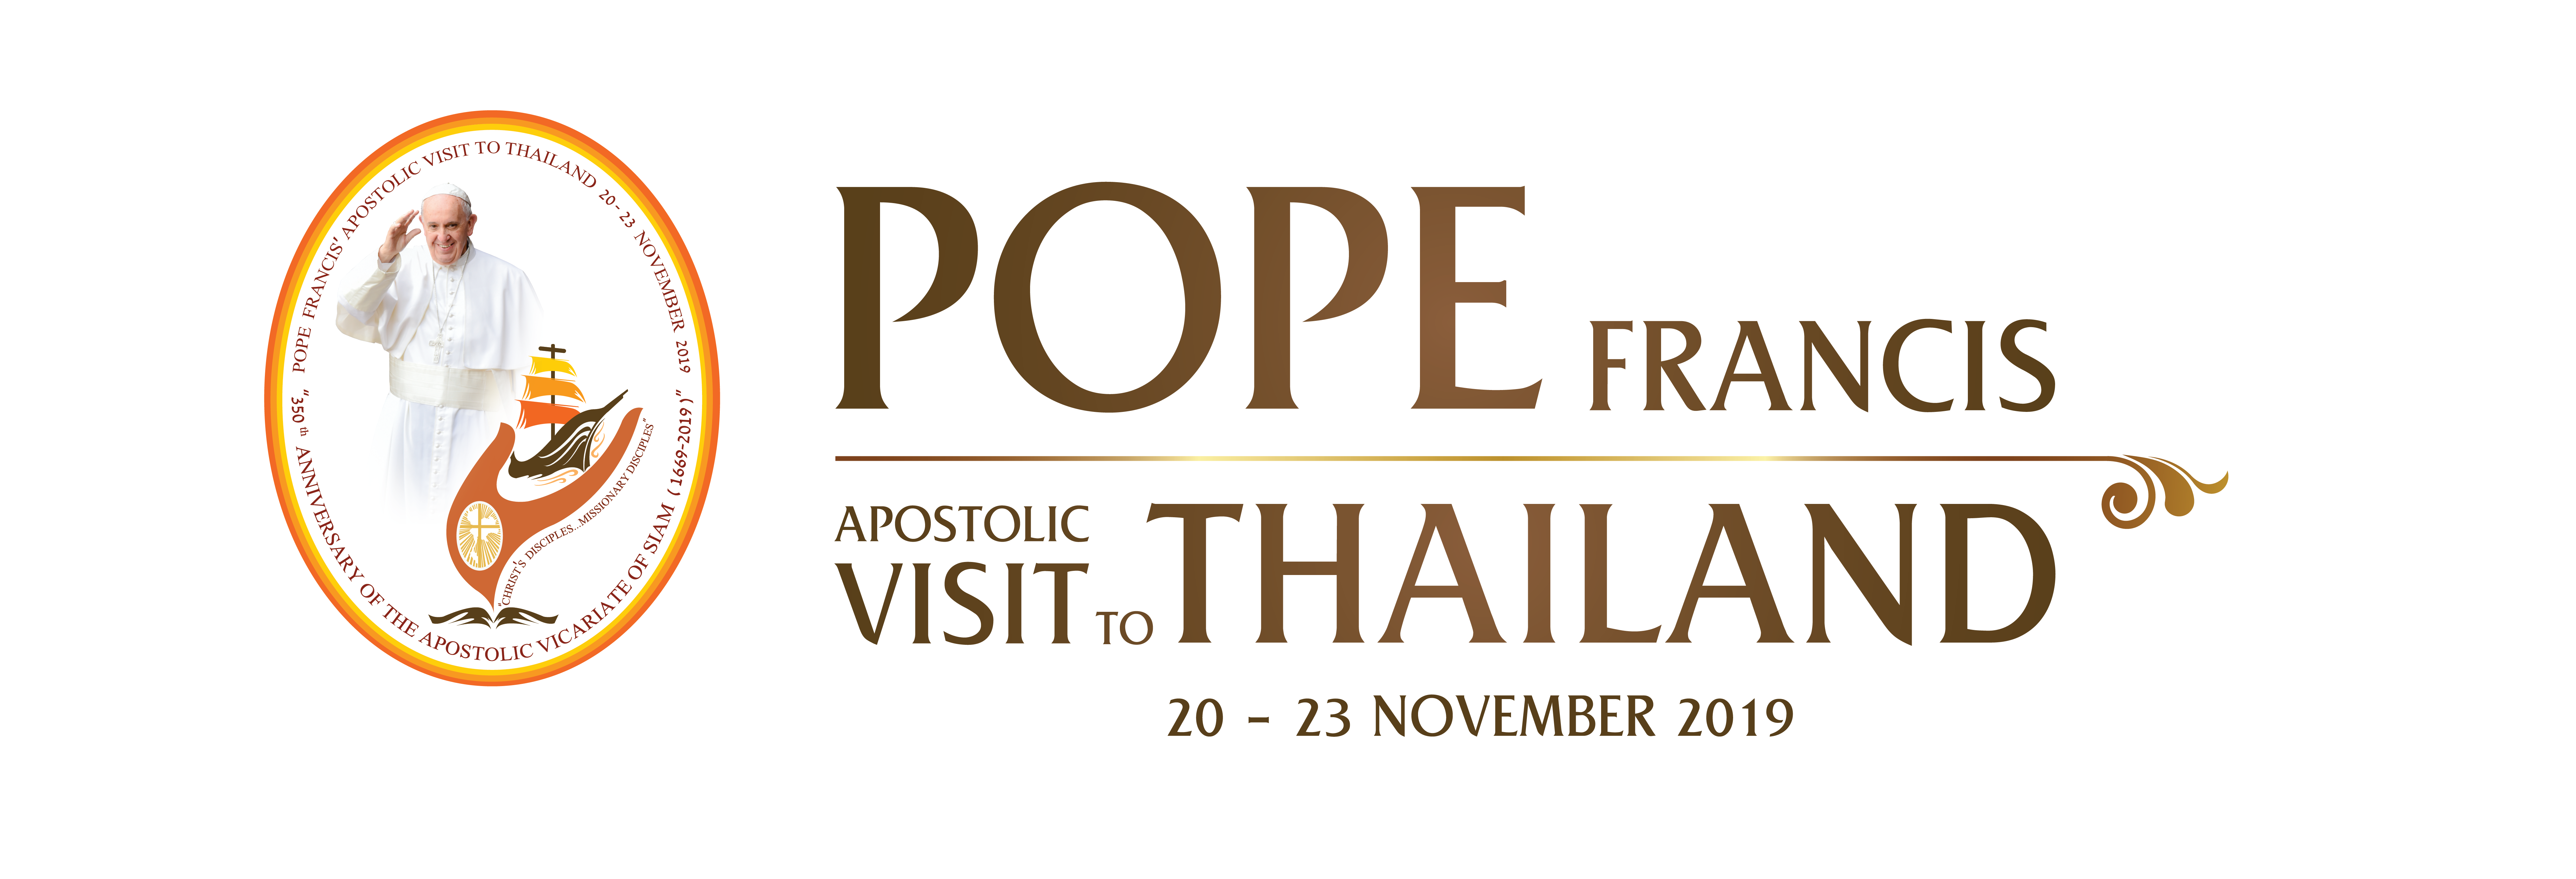 His Holiness Pope Francis Apostolic Visit to Thailand